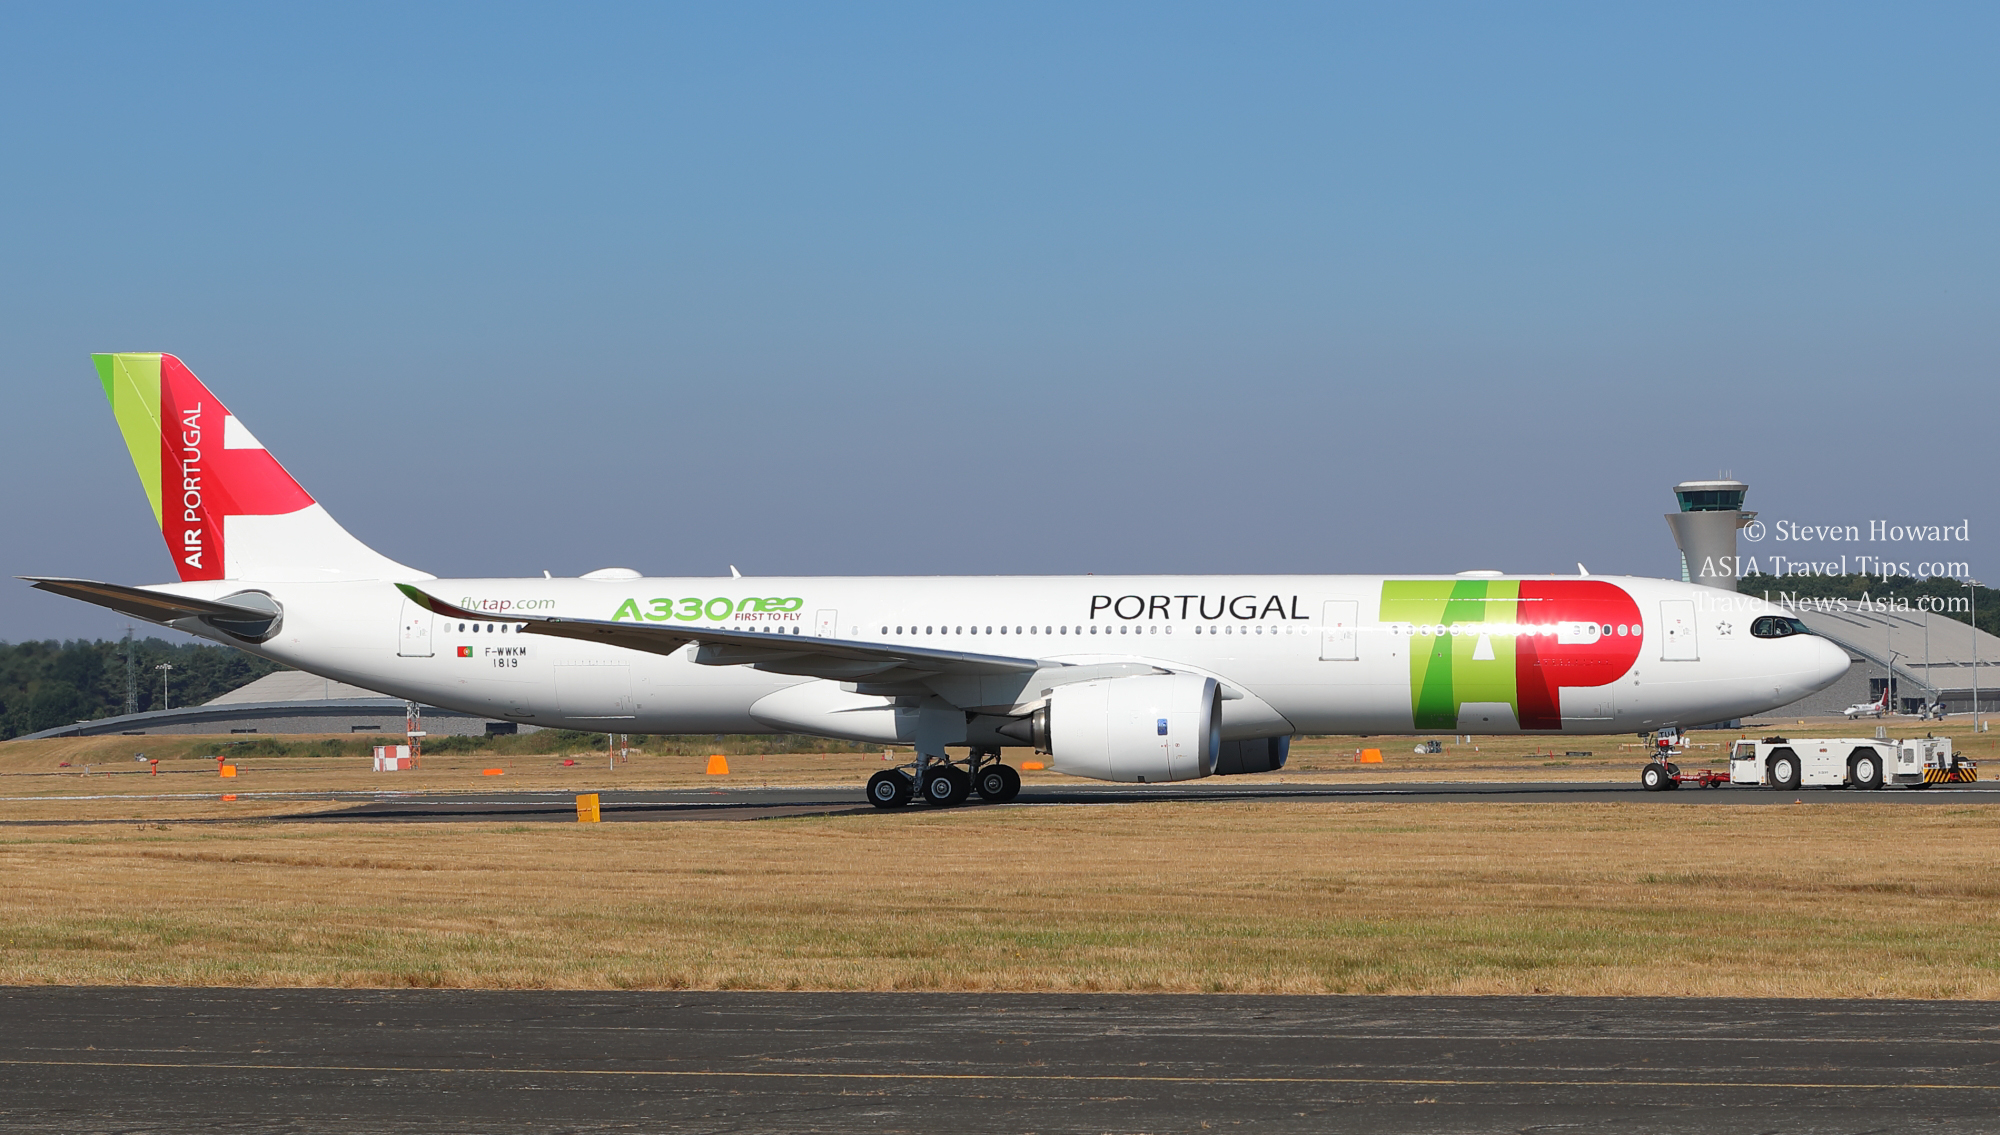 TAP Portugal Airbus A330-900 reg: F-WWKM. Picture by Steven Howard of TravelNewsAsia.com Click to enlarge.